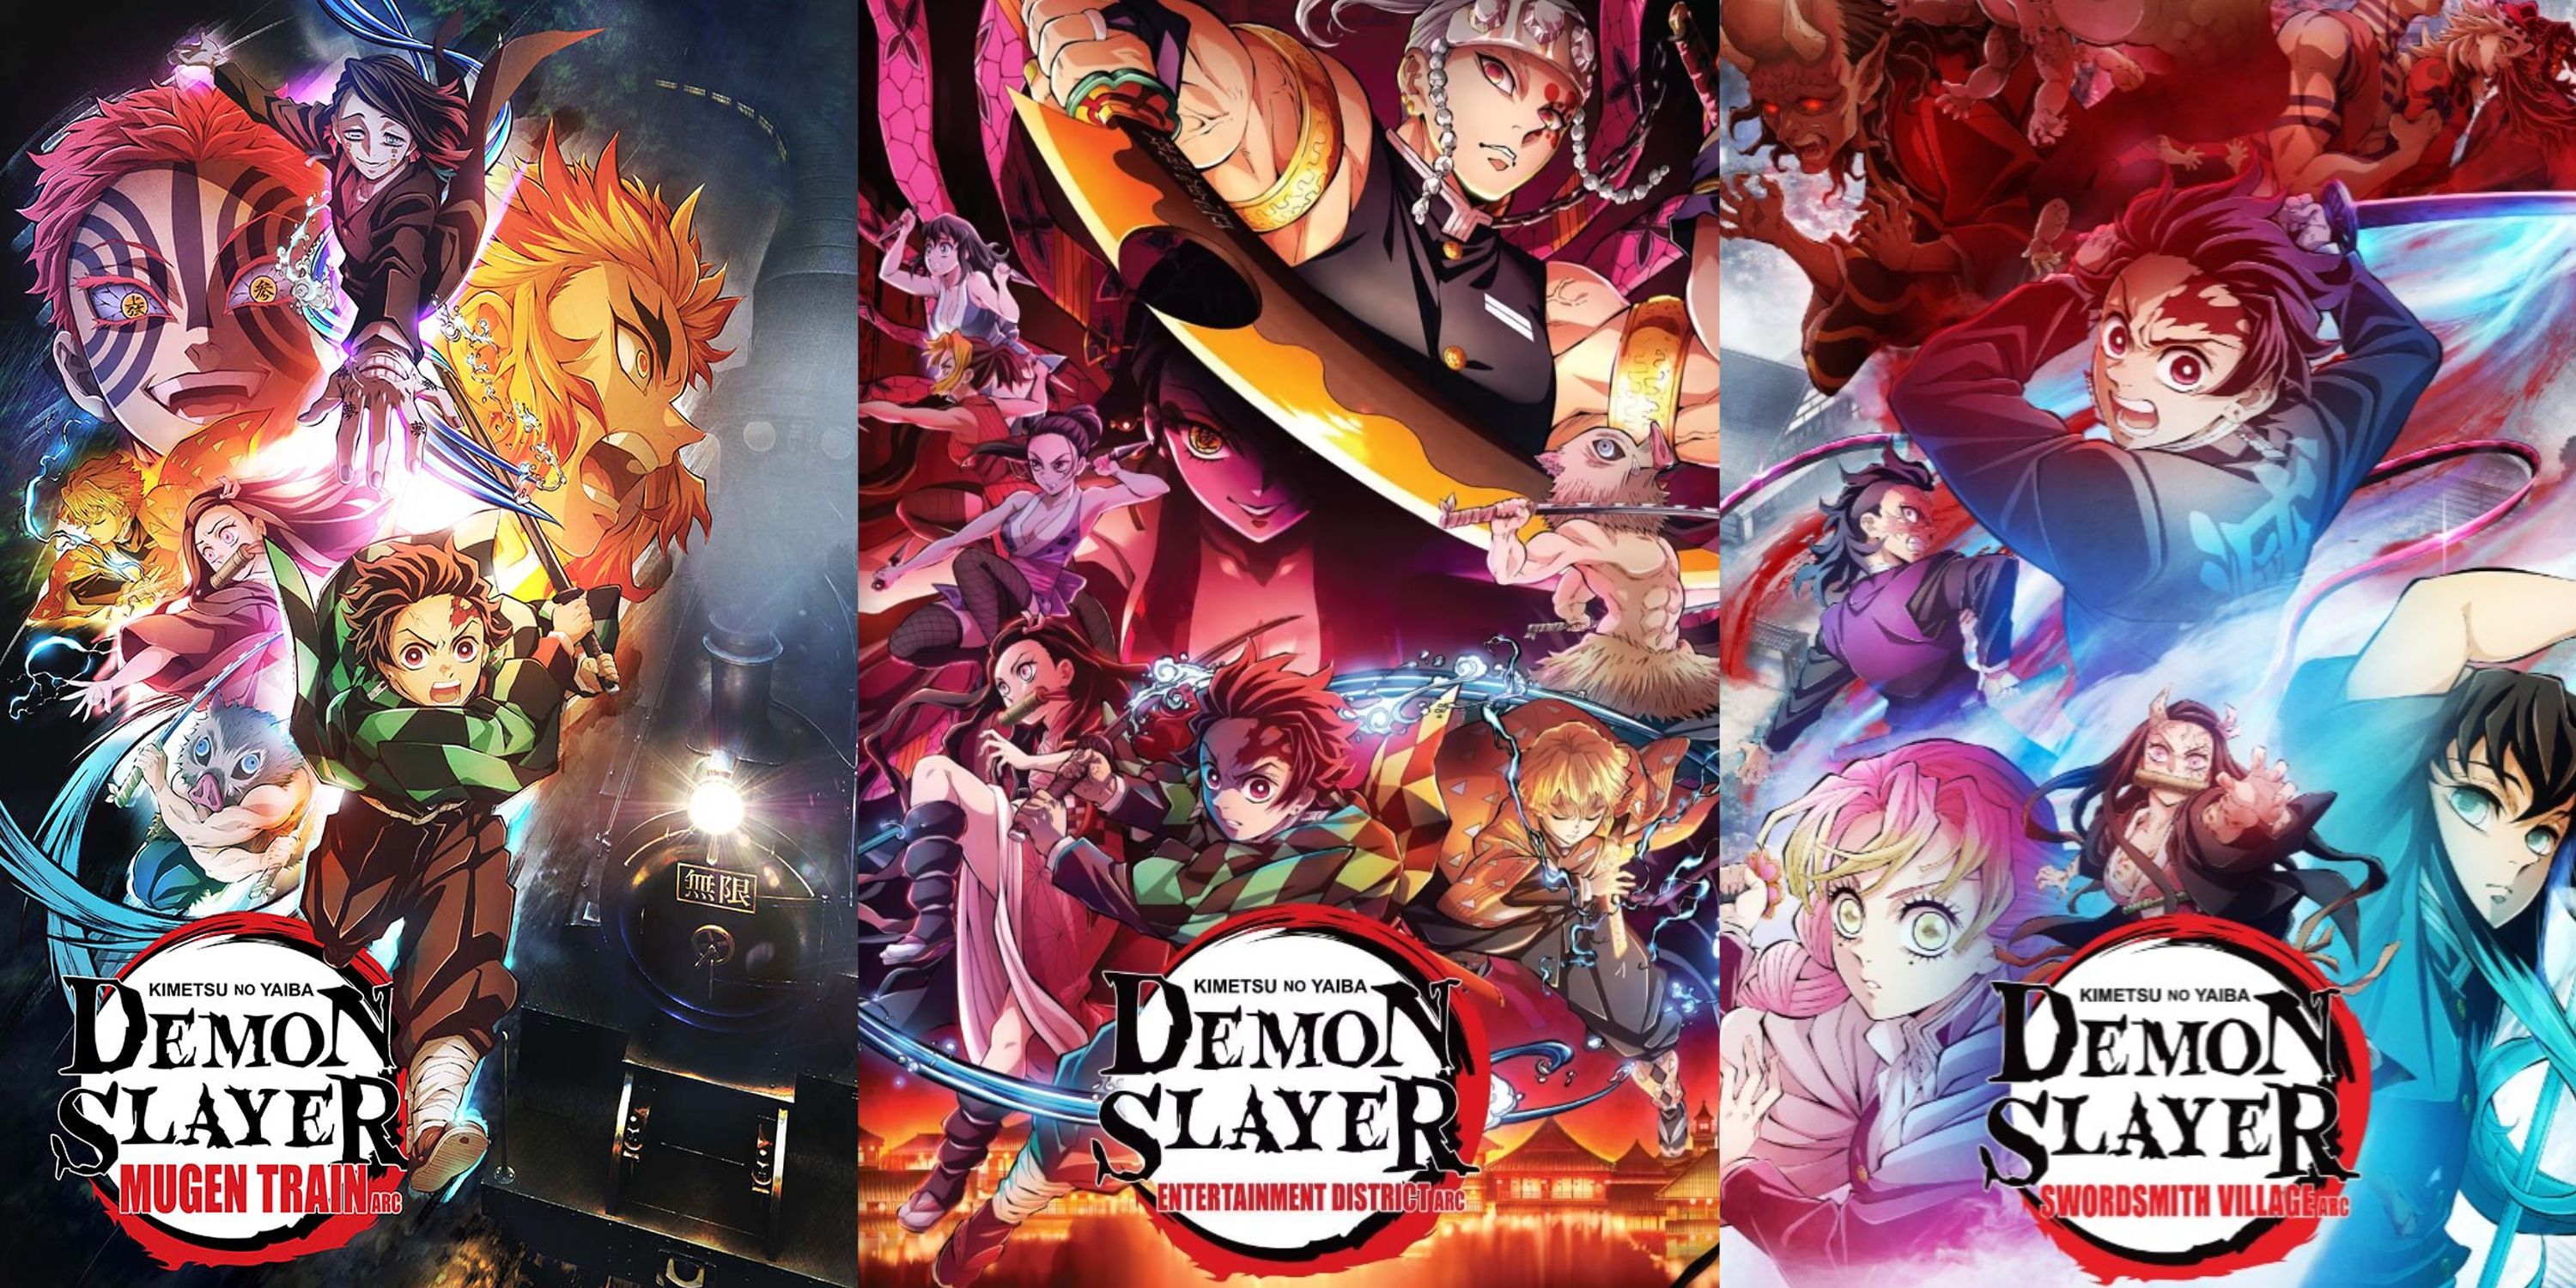 Demon Slayer Season 2 Previews And Gameplay For New Game Released  Anime  Corner